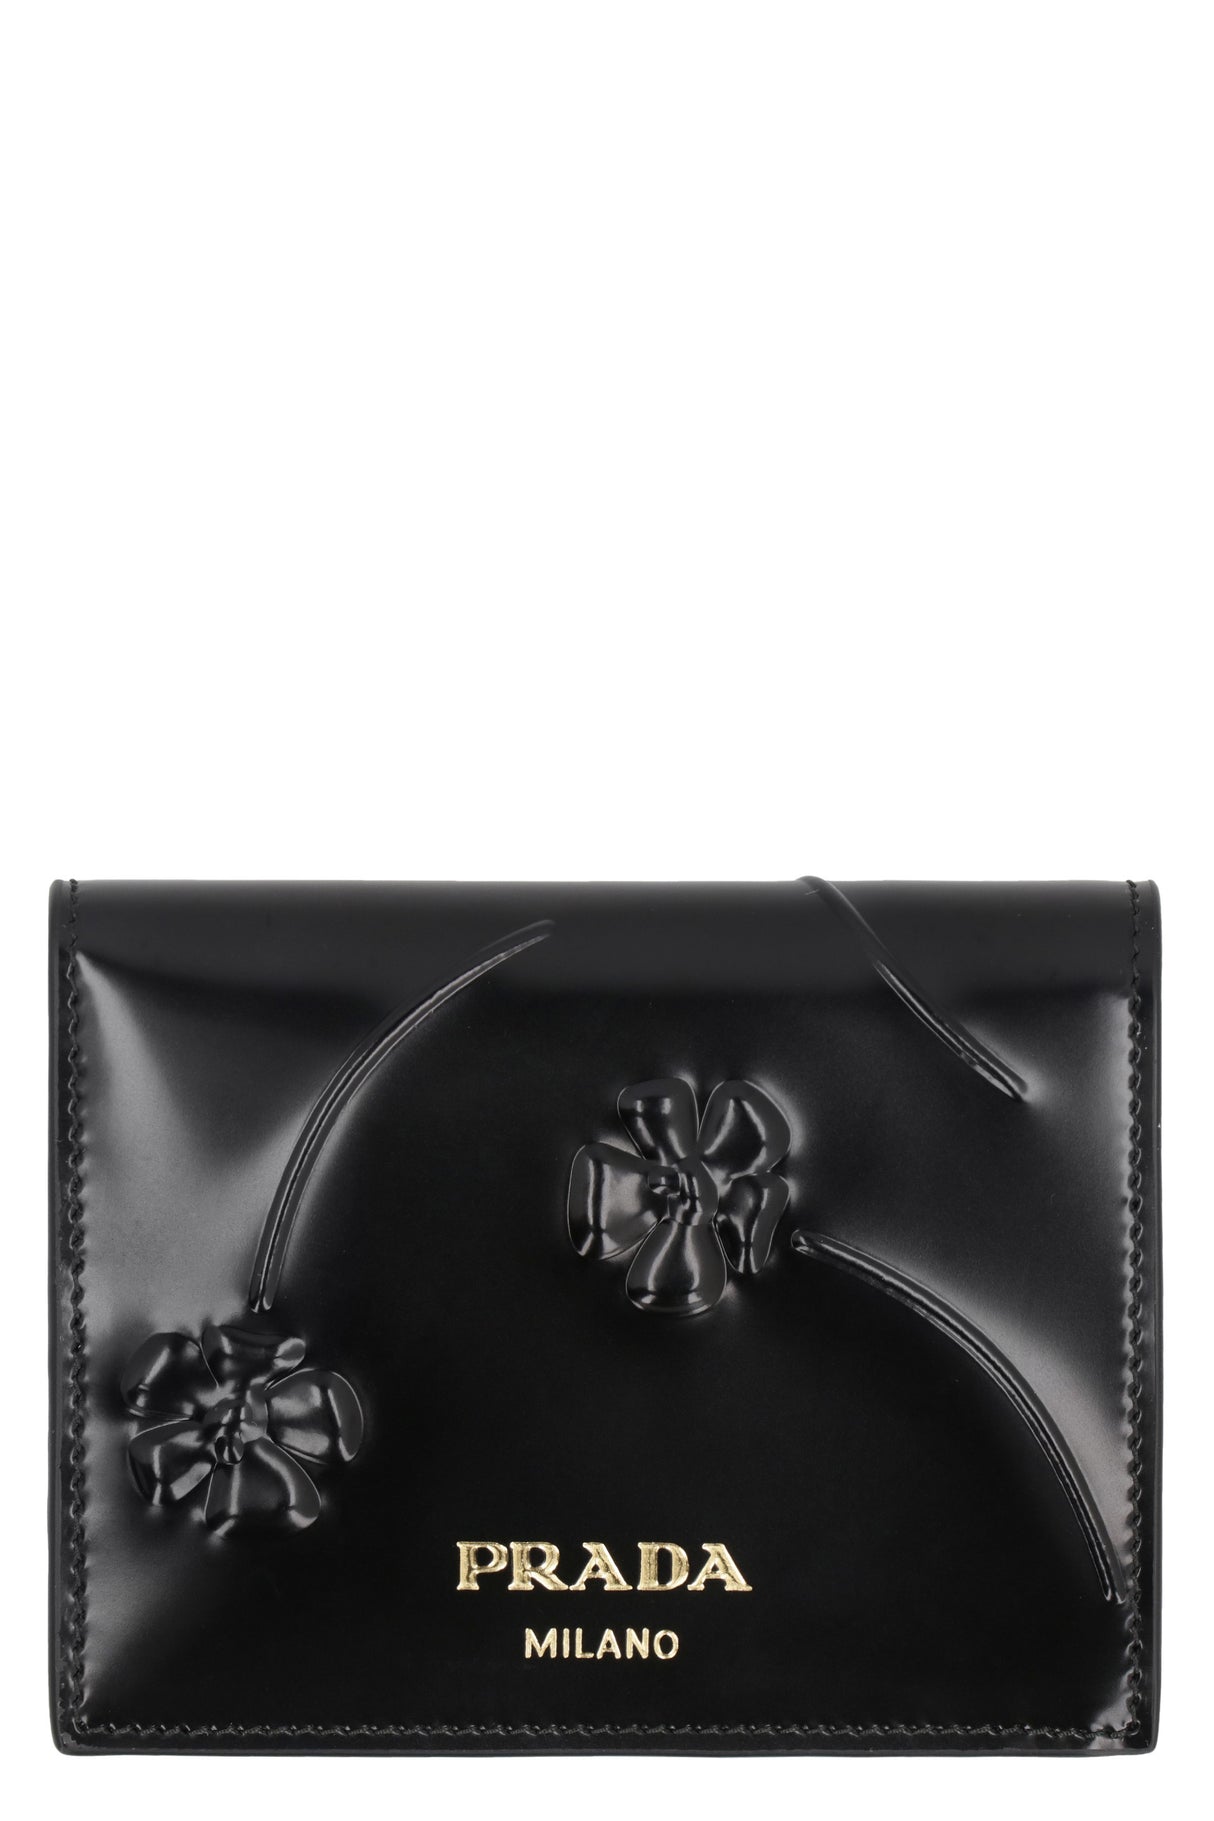 PRADA Luxurious Leather Wallet for Women - Black with Snap Button Closure